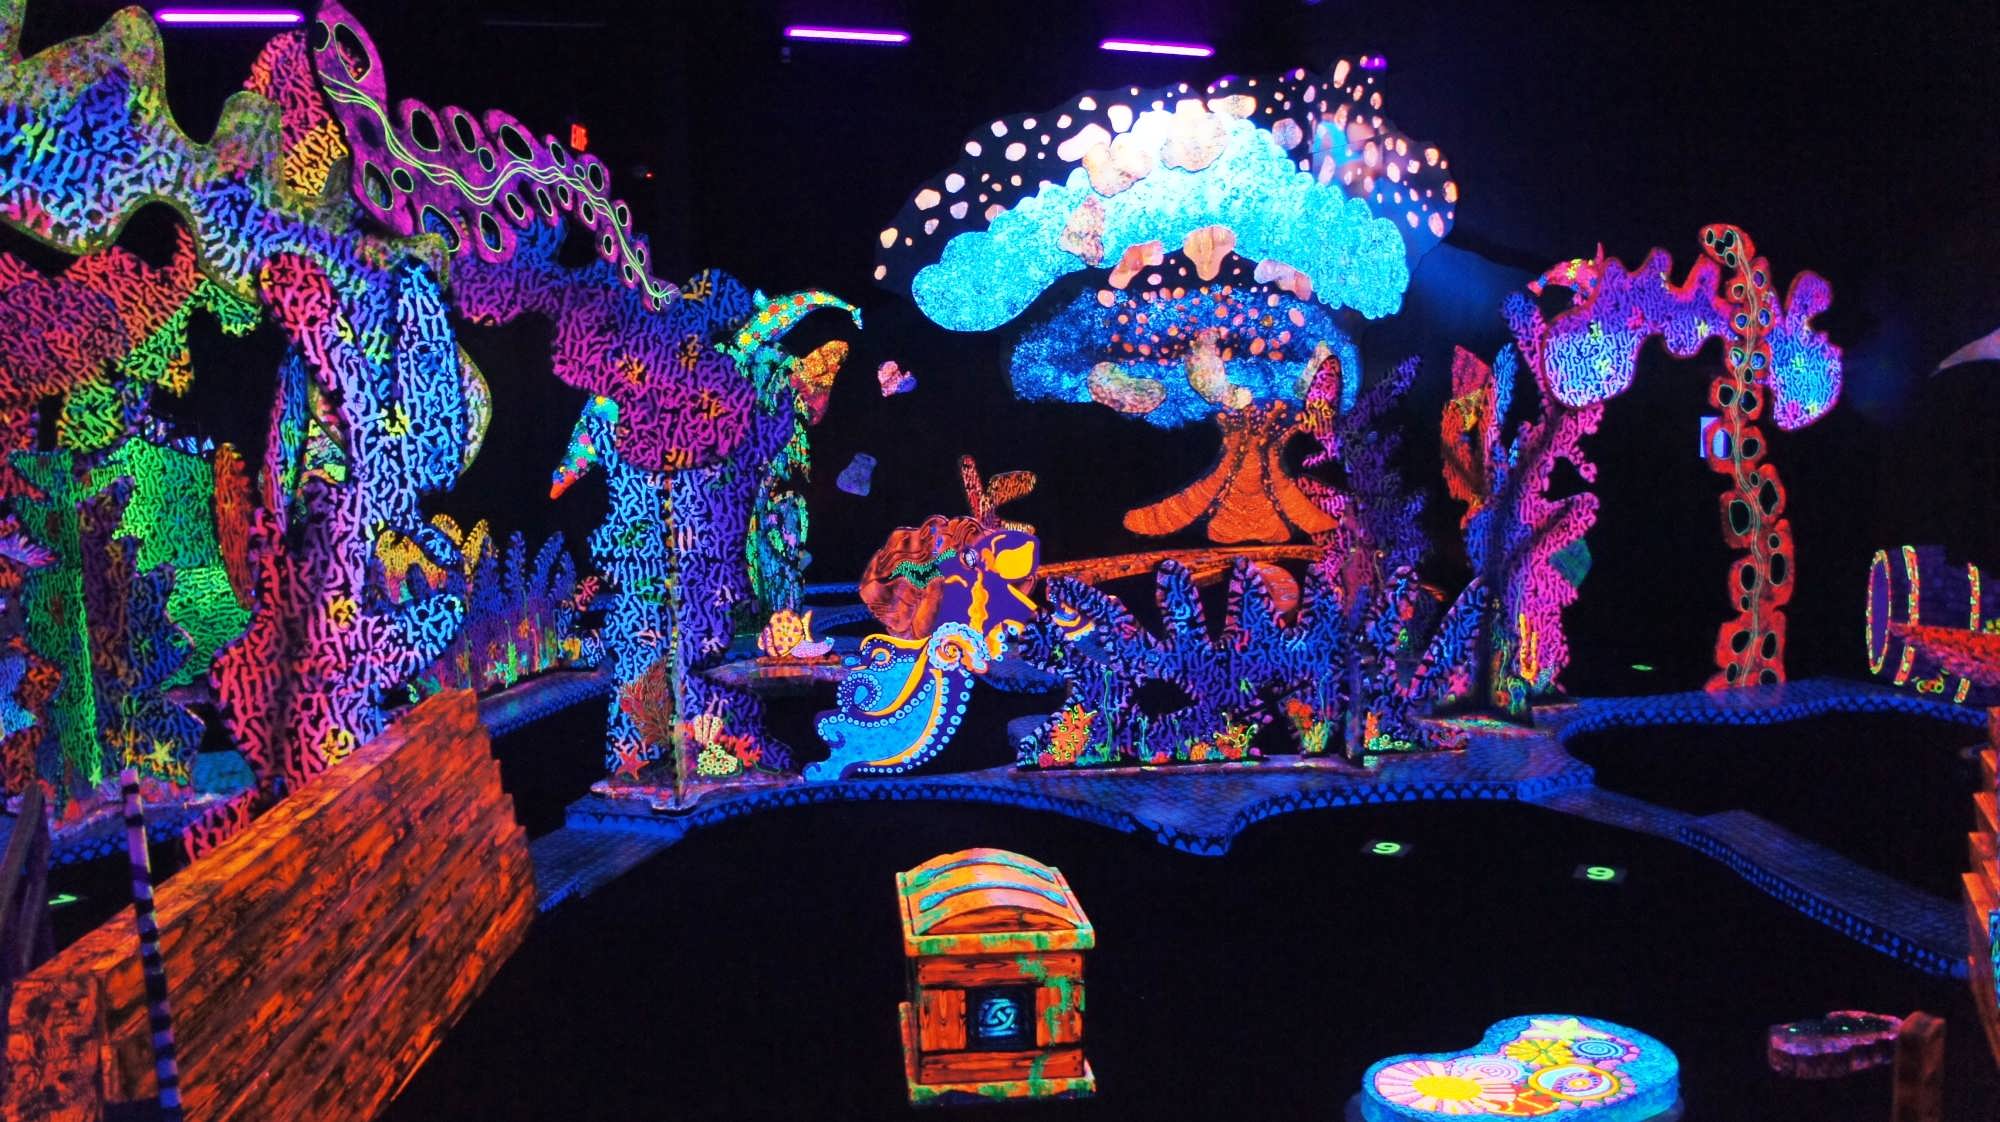 Putting Edge Glow in the Dark Mini Golf: Putt your way into the abyss